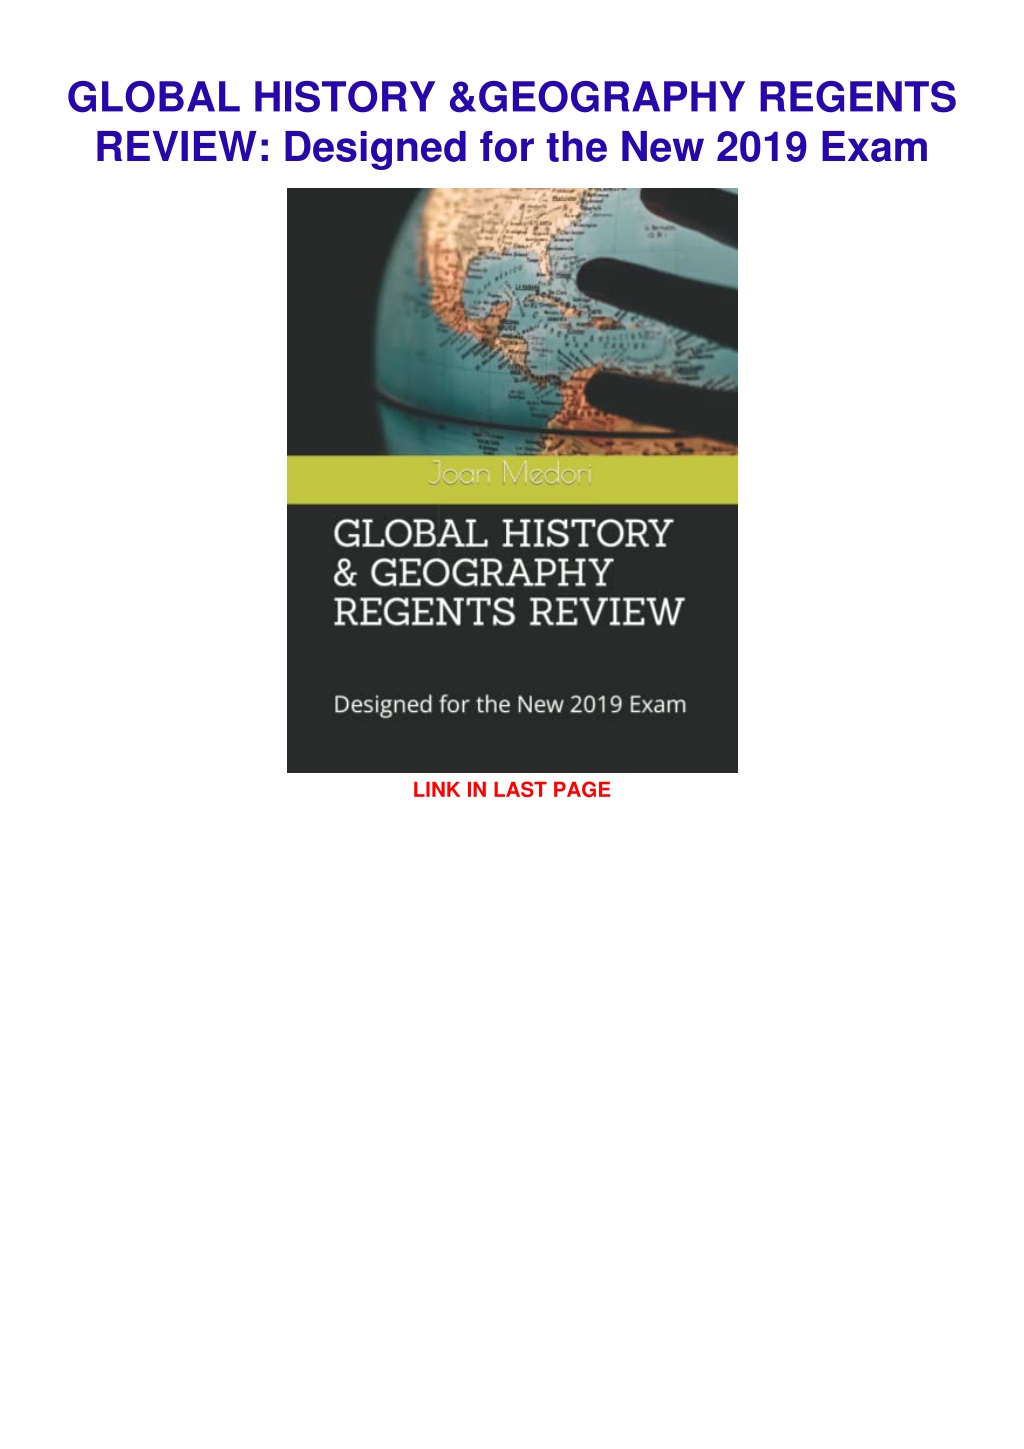 PPT [READ DOWNLOAD] GLOBAL HISTORY & GEOGRAPHY REGENTS REVIEW